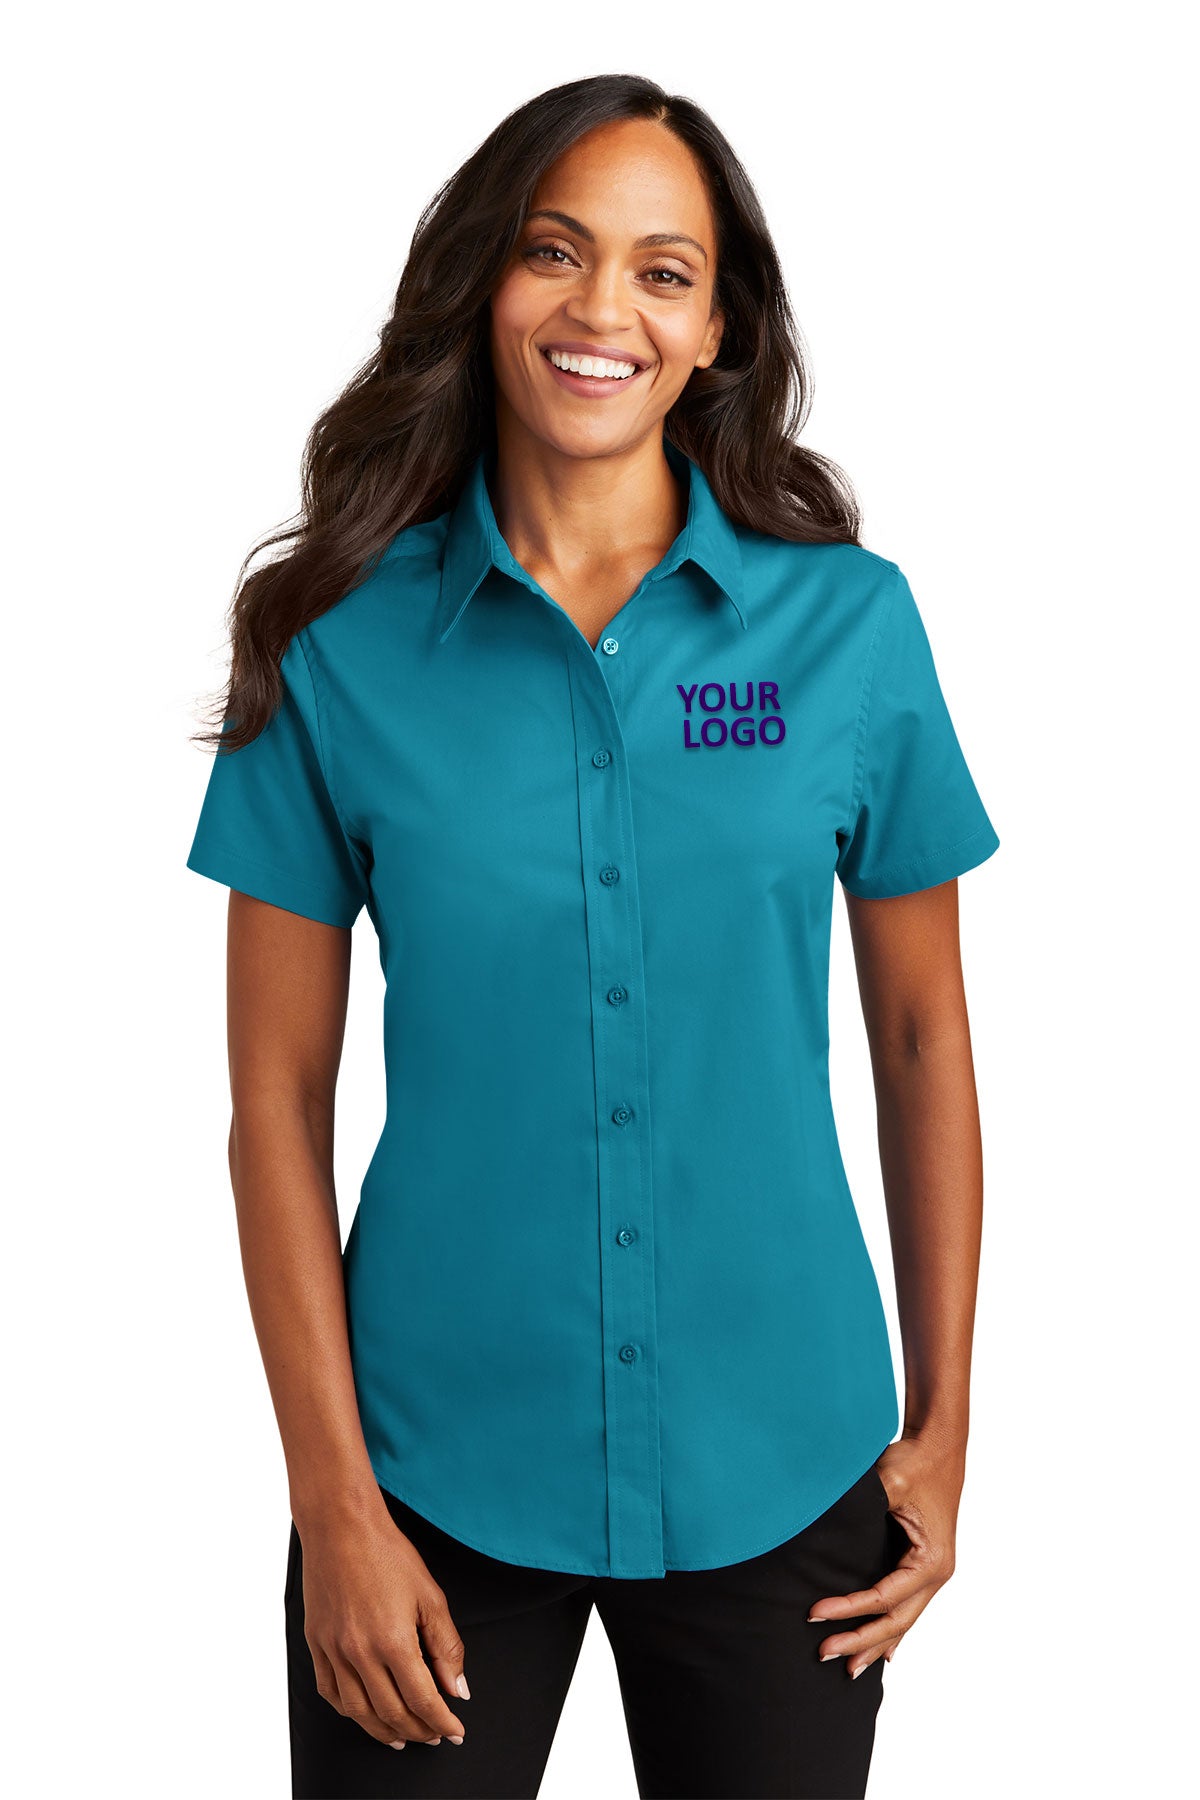 Port Authority Teal Green L508 work shirts with logo